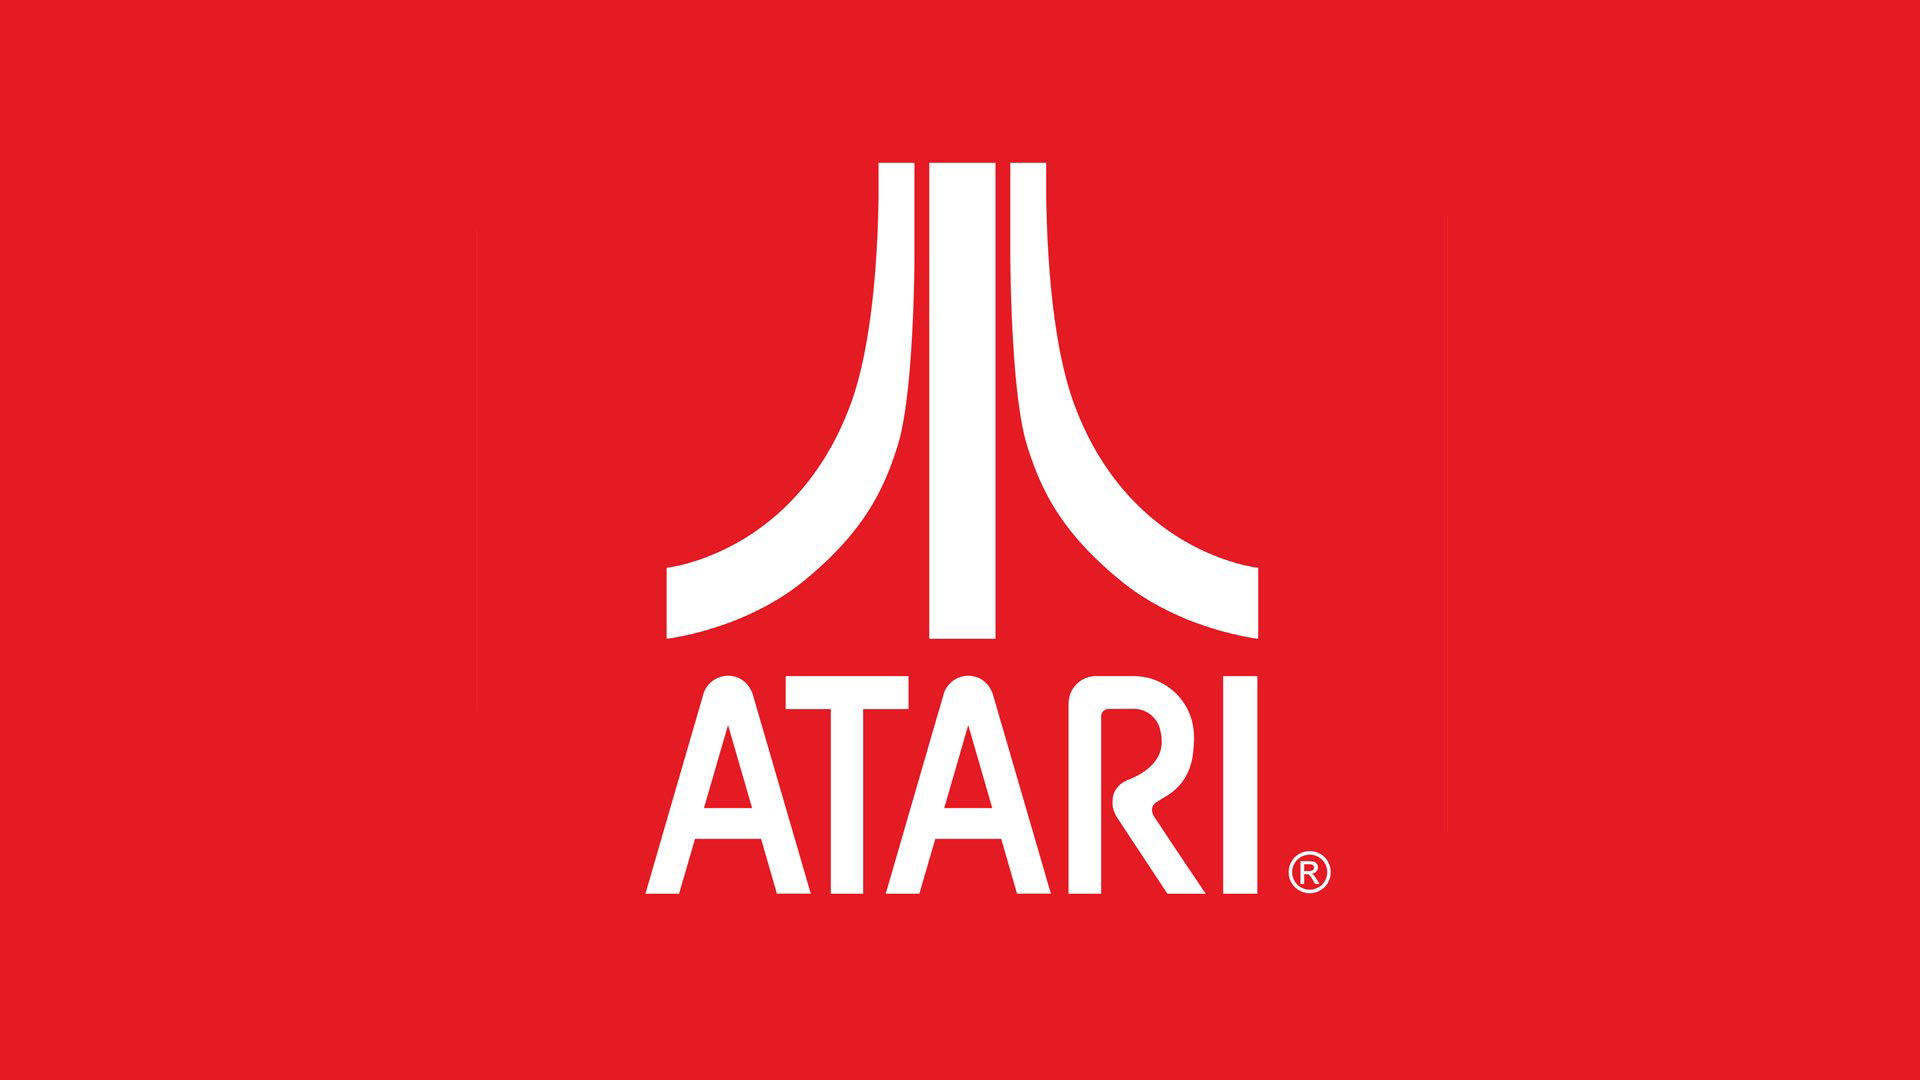 Atari has completed their MobyGames acquisition